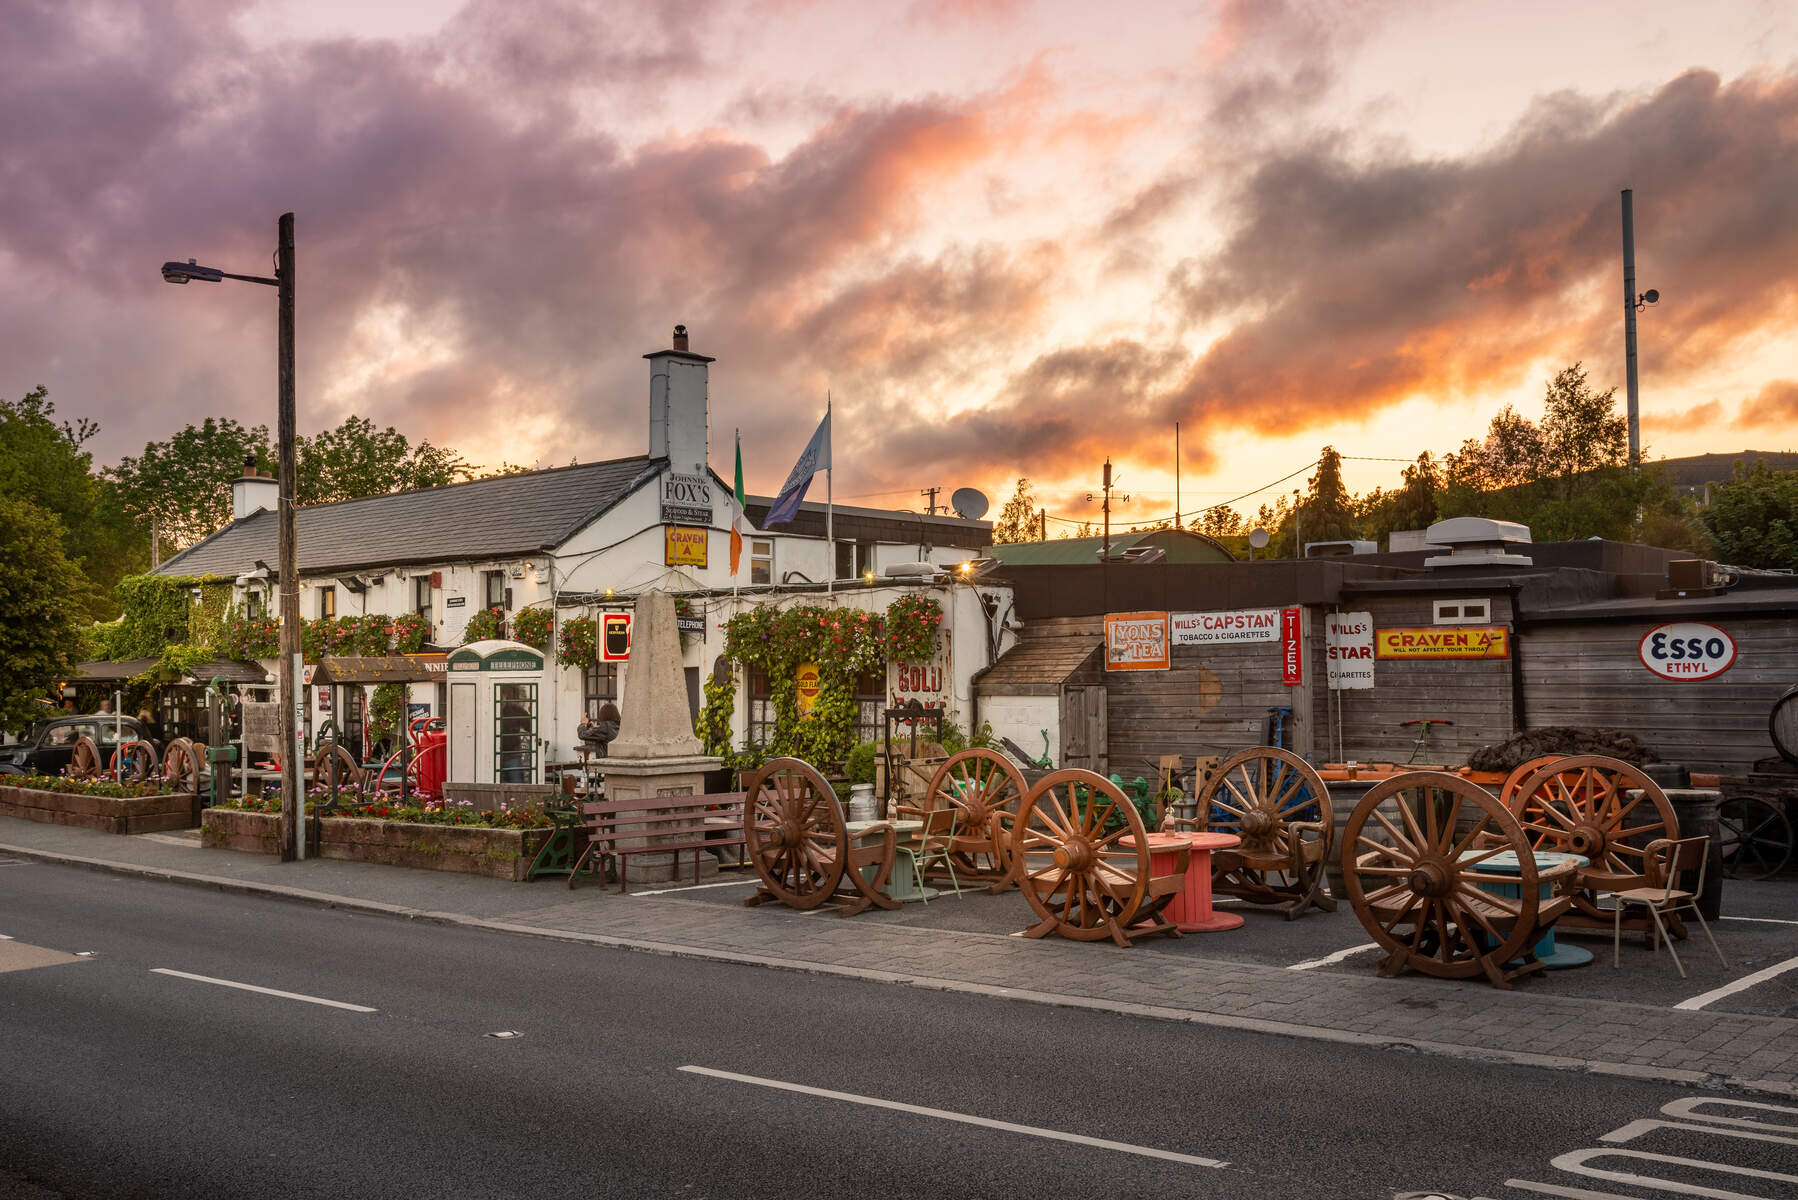 View of Johnnie Fox's pub in the Dublin Mountains at sunset.